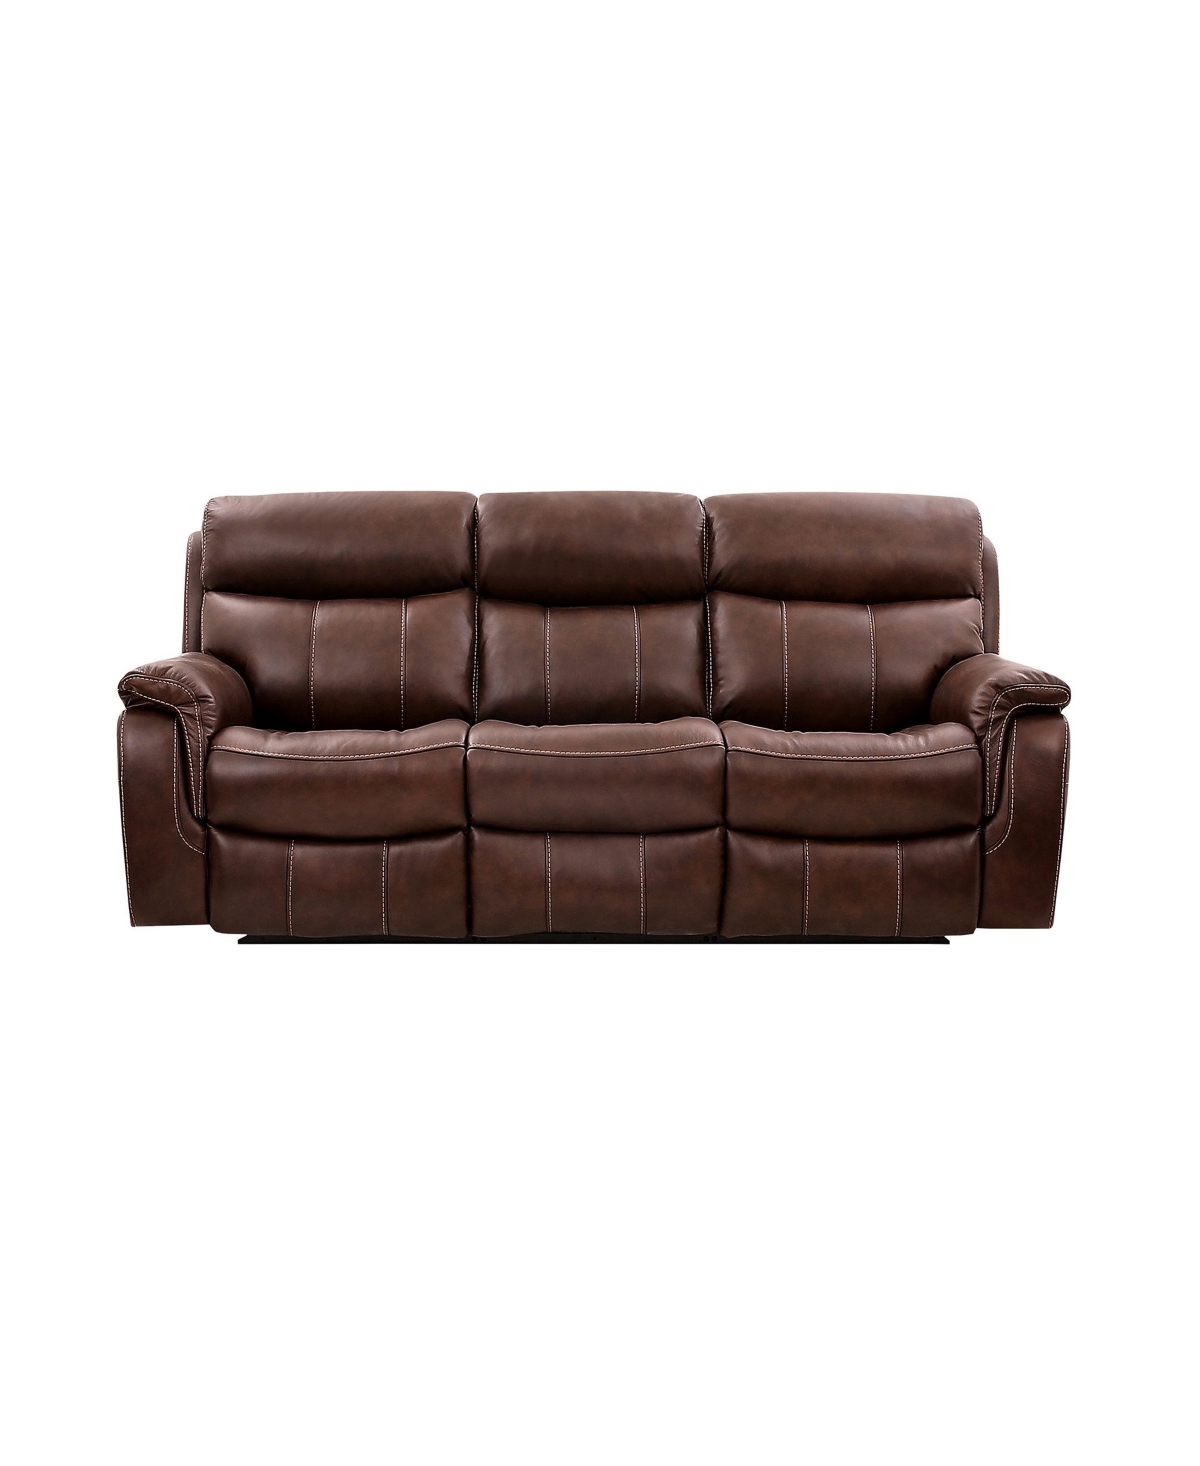 Armen Living Montague 86" Genuine Leather In Dual Power Headrest And Lumbar Support Reclining Sofa In Brown